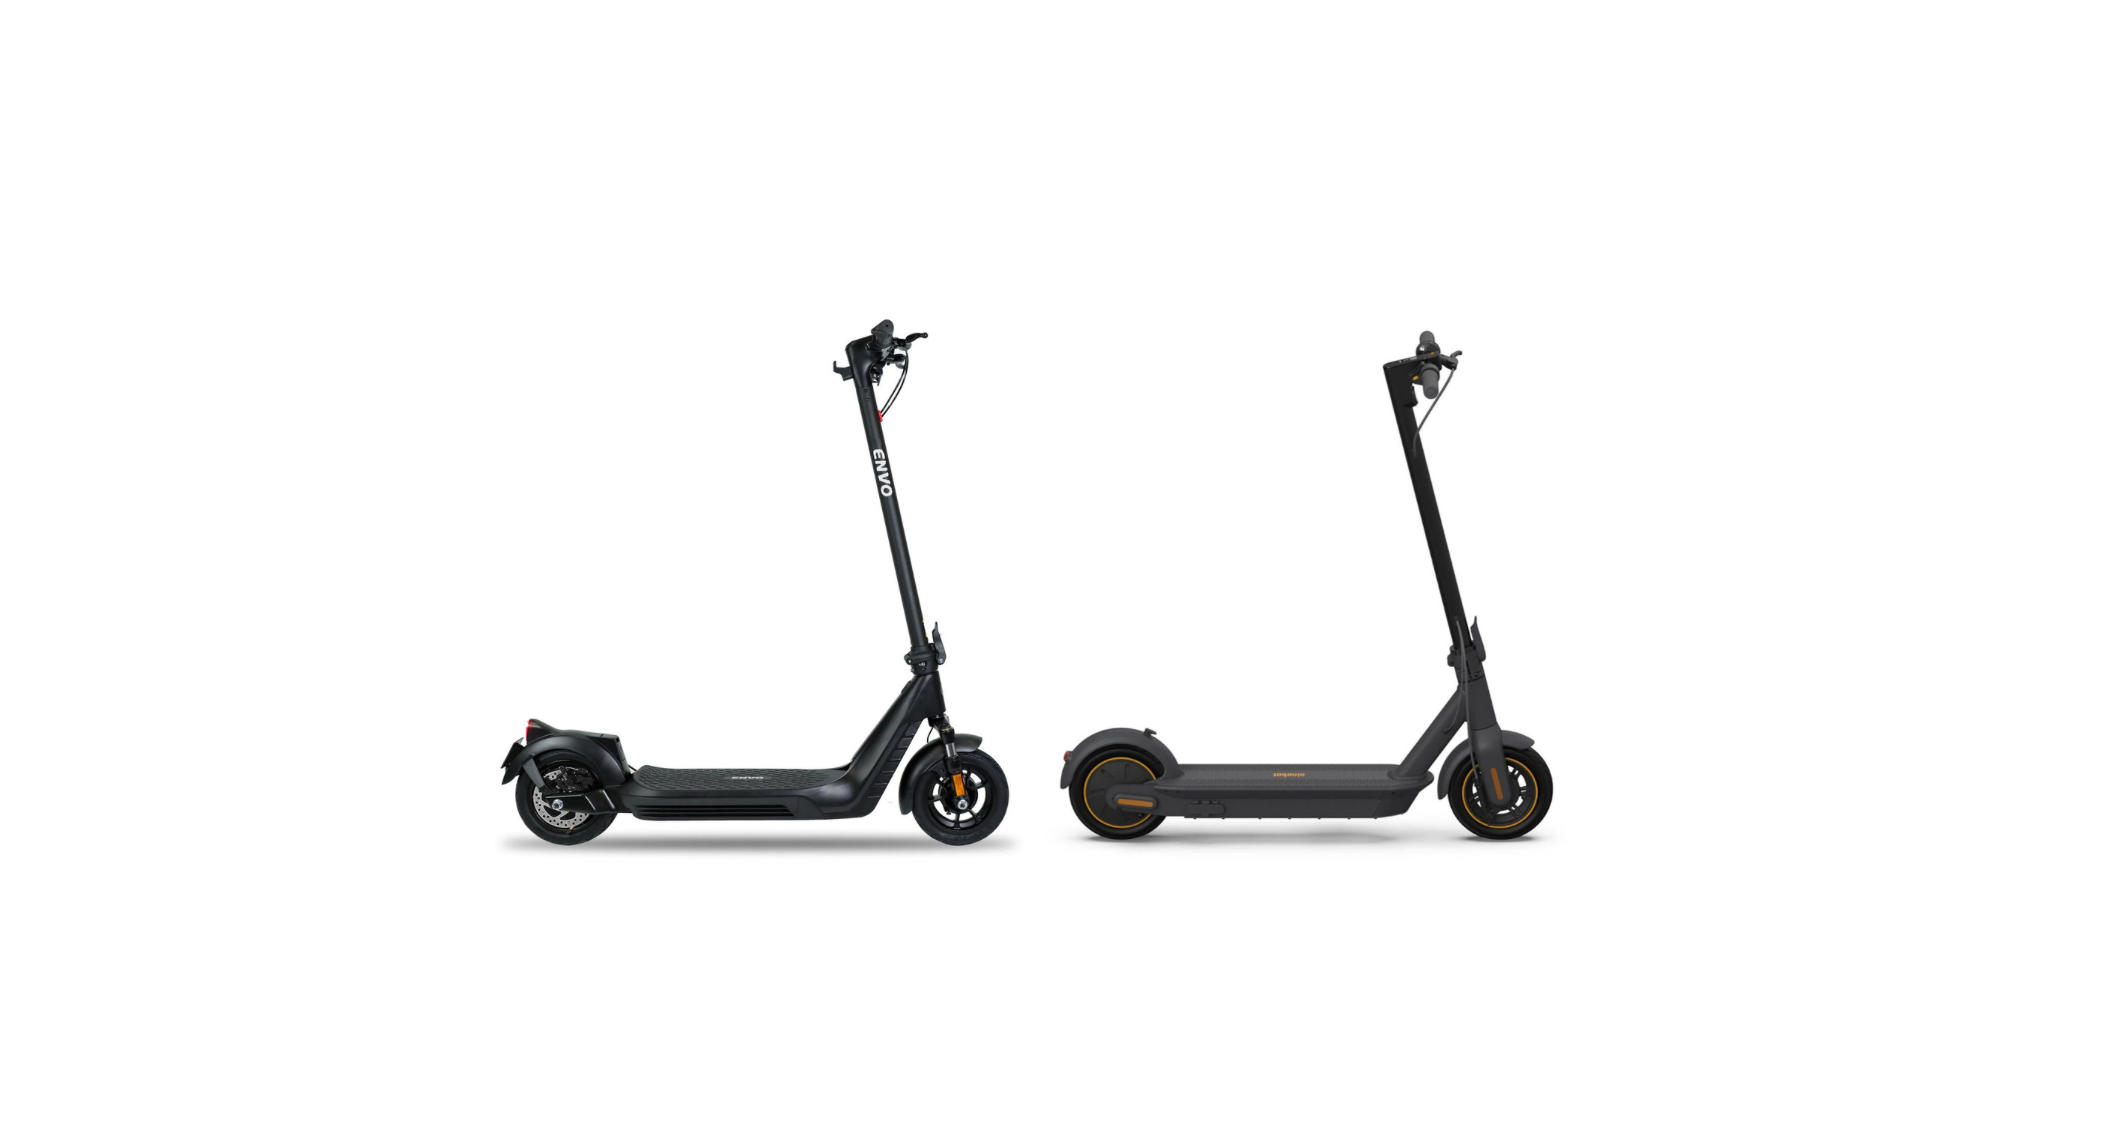 Best Electric Scooter for Commute and Fun: A Comparison of Ninebot Kic